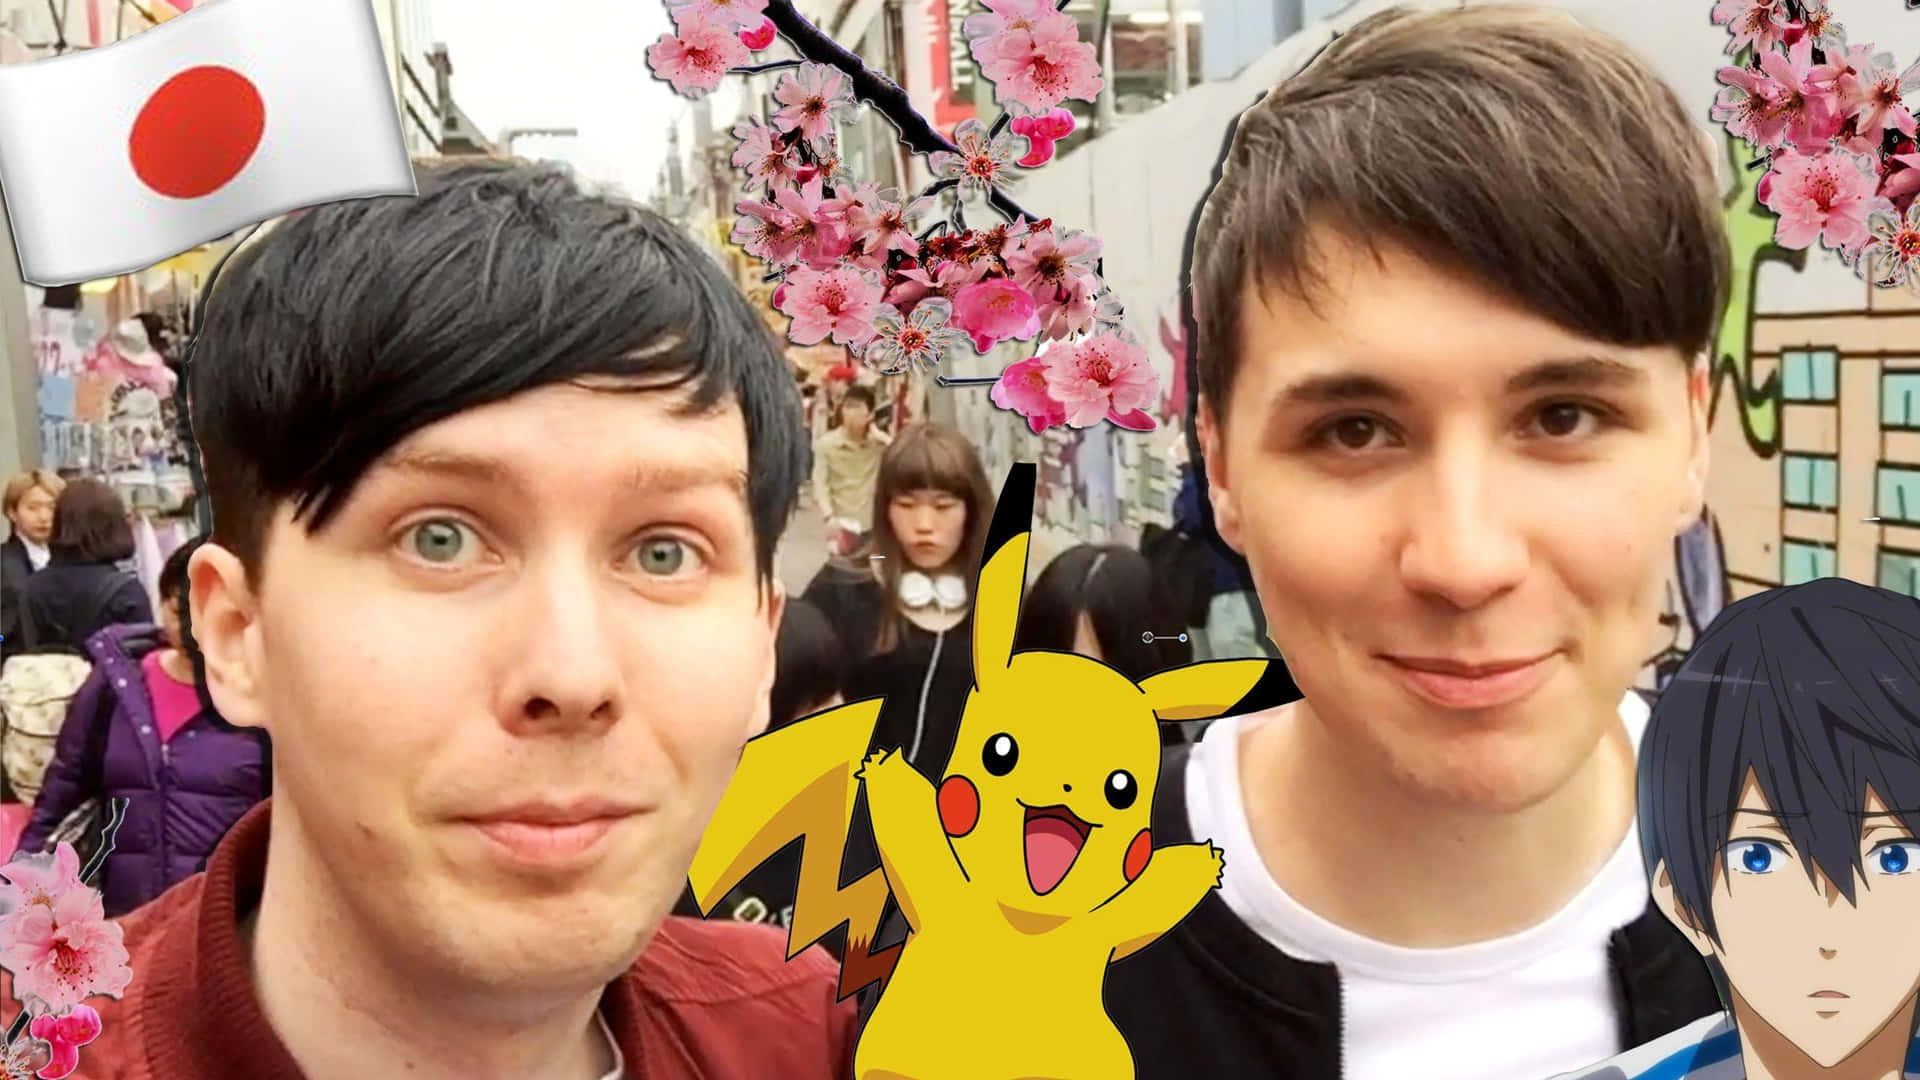 "Cute and funny duo Dan and Phil create exciting content with a smile!" Wallpaper